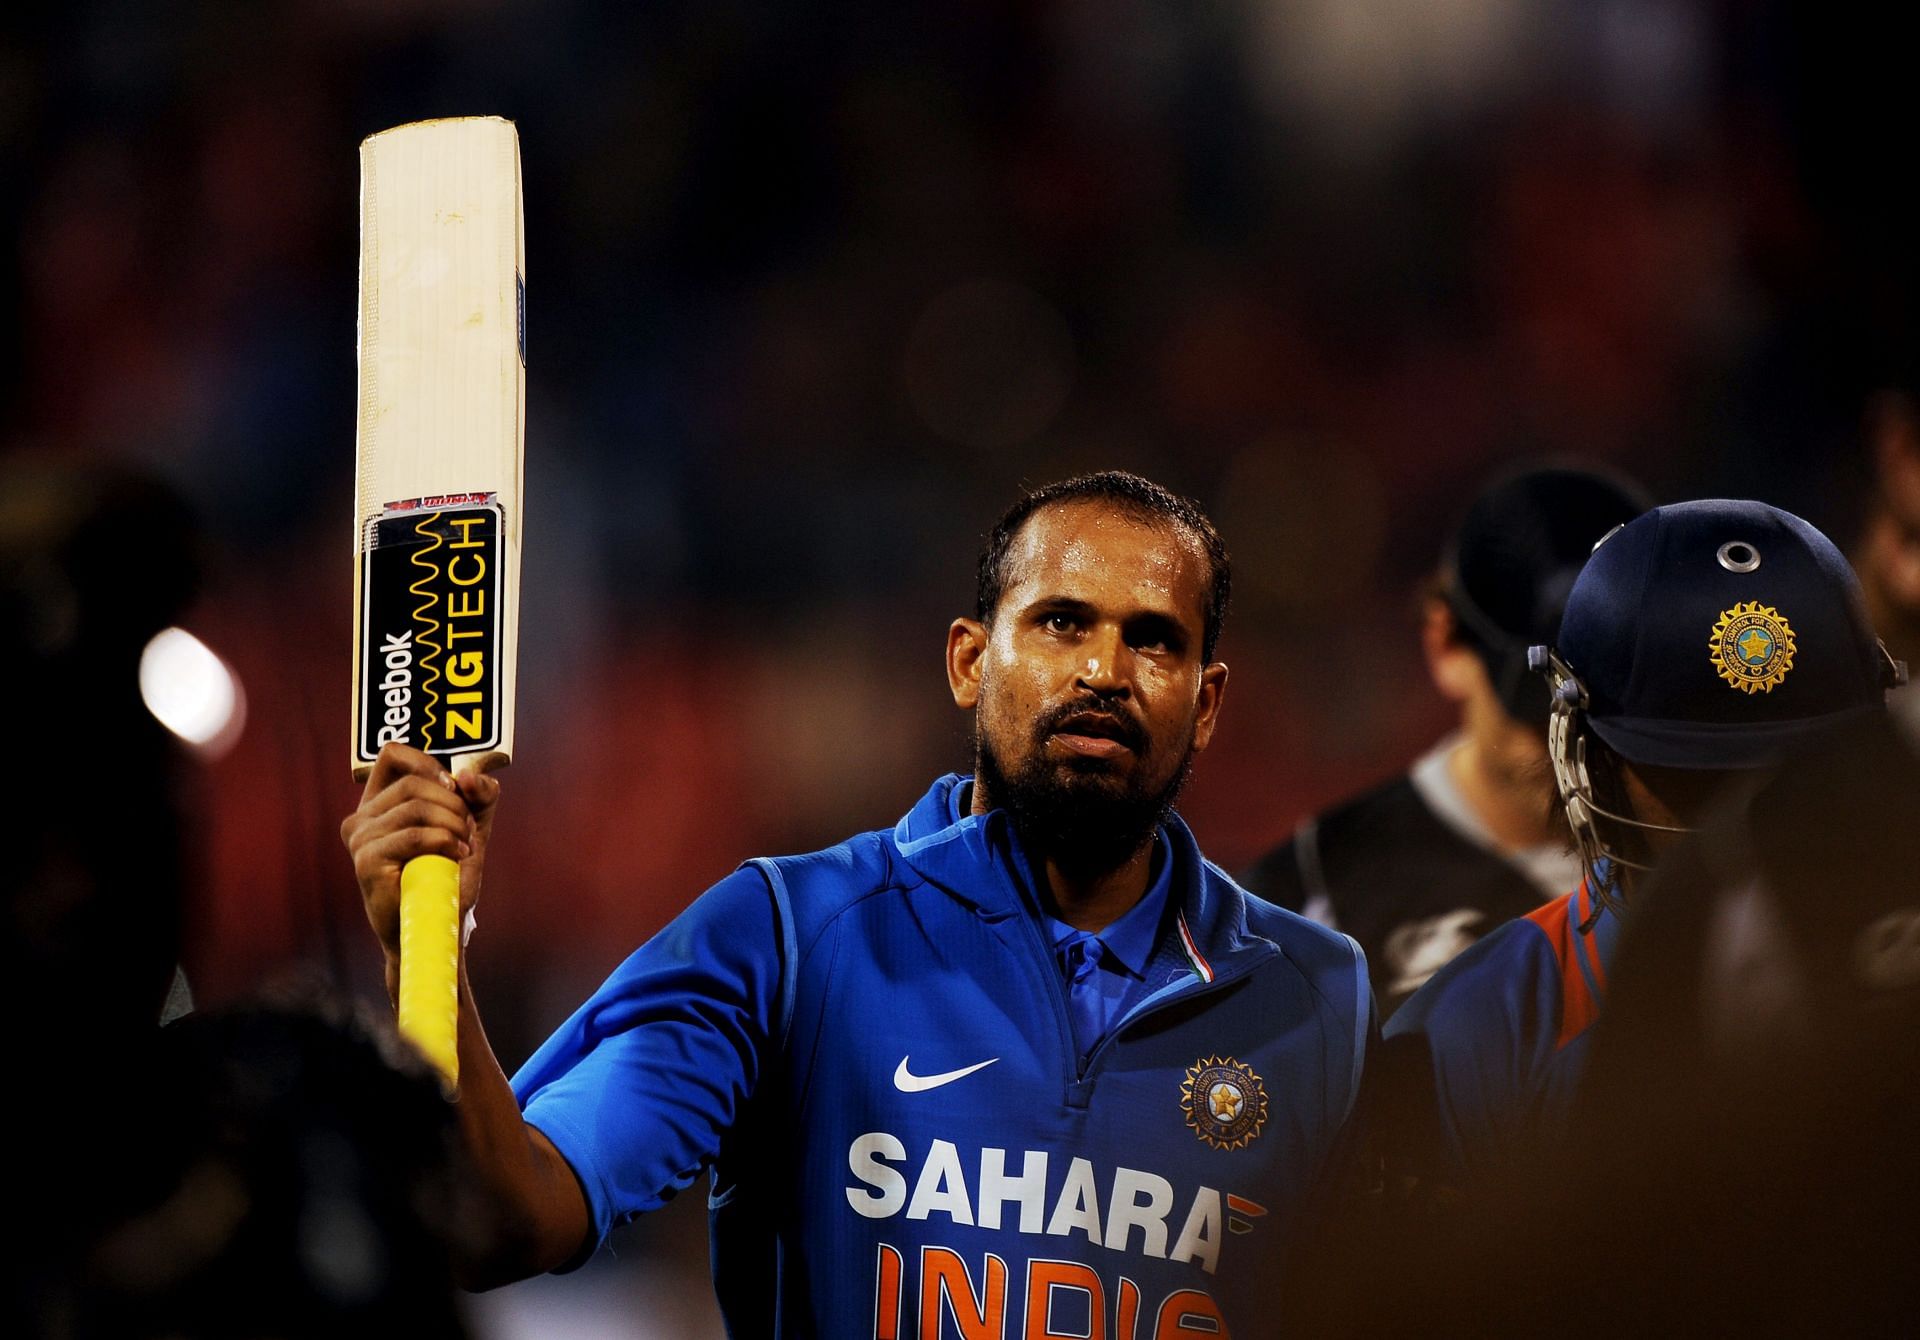 Yusuf pathan will be leading the Chhattisgarh Warriors (Image Courtesy: ICC Cricket World Cup 2019)